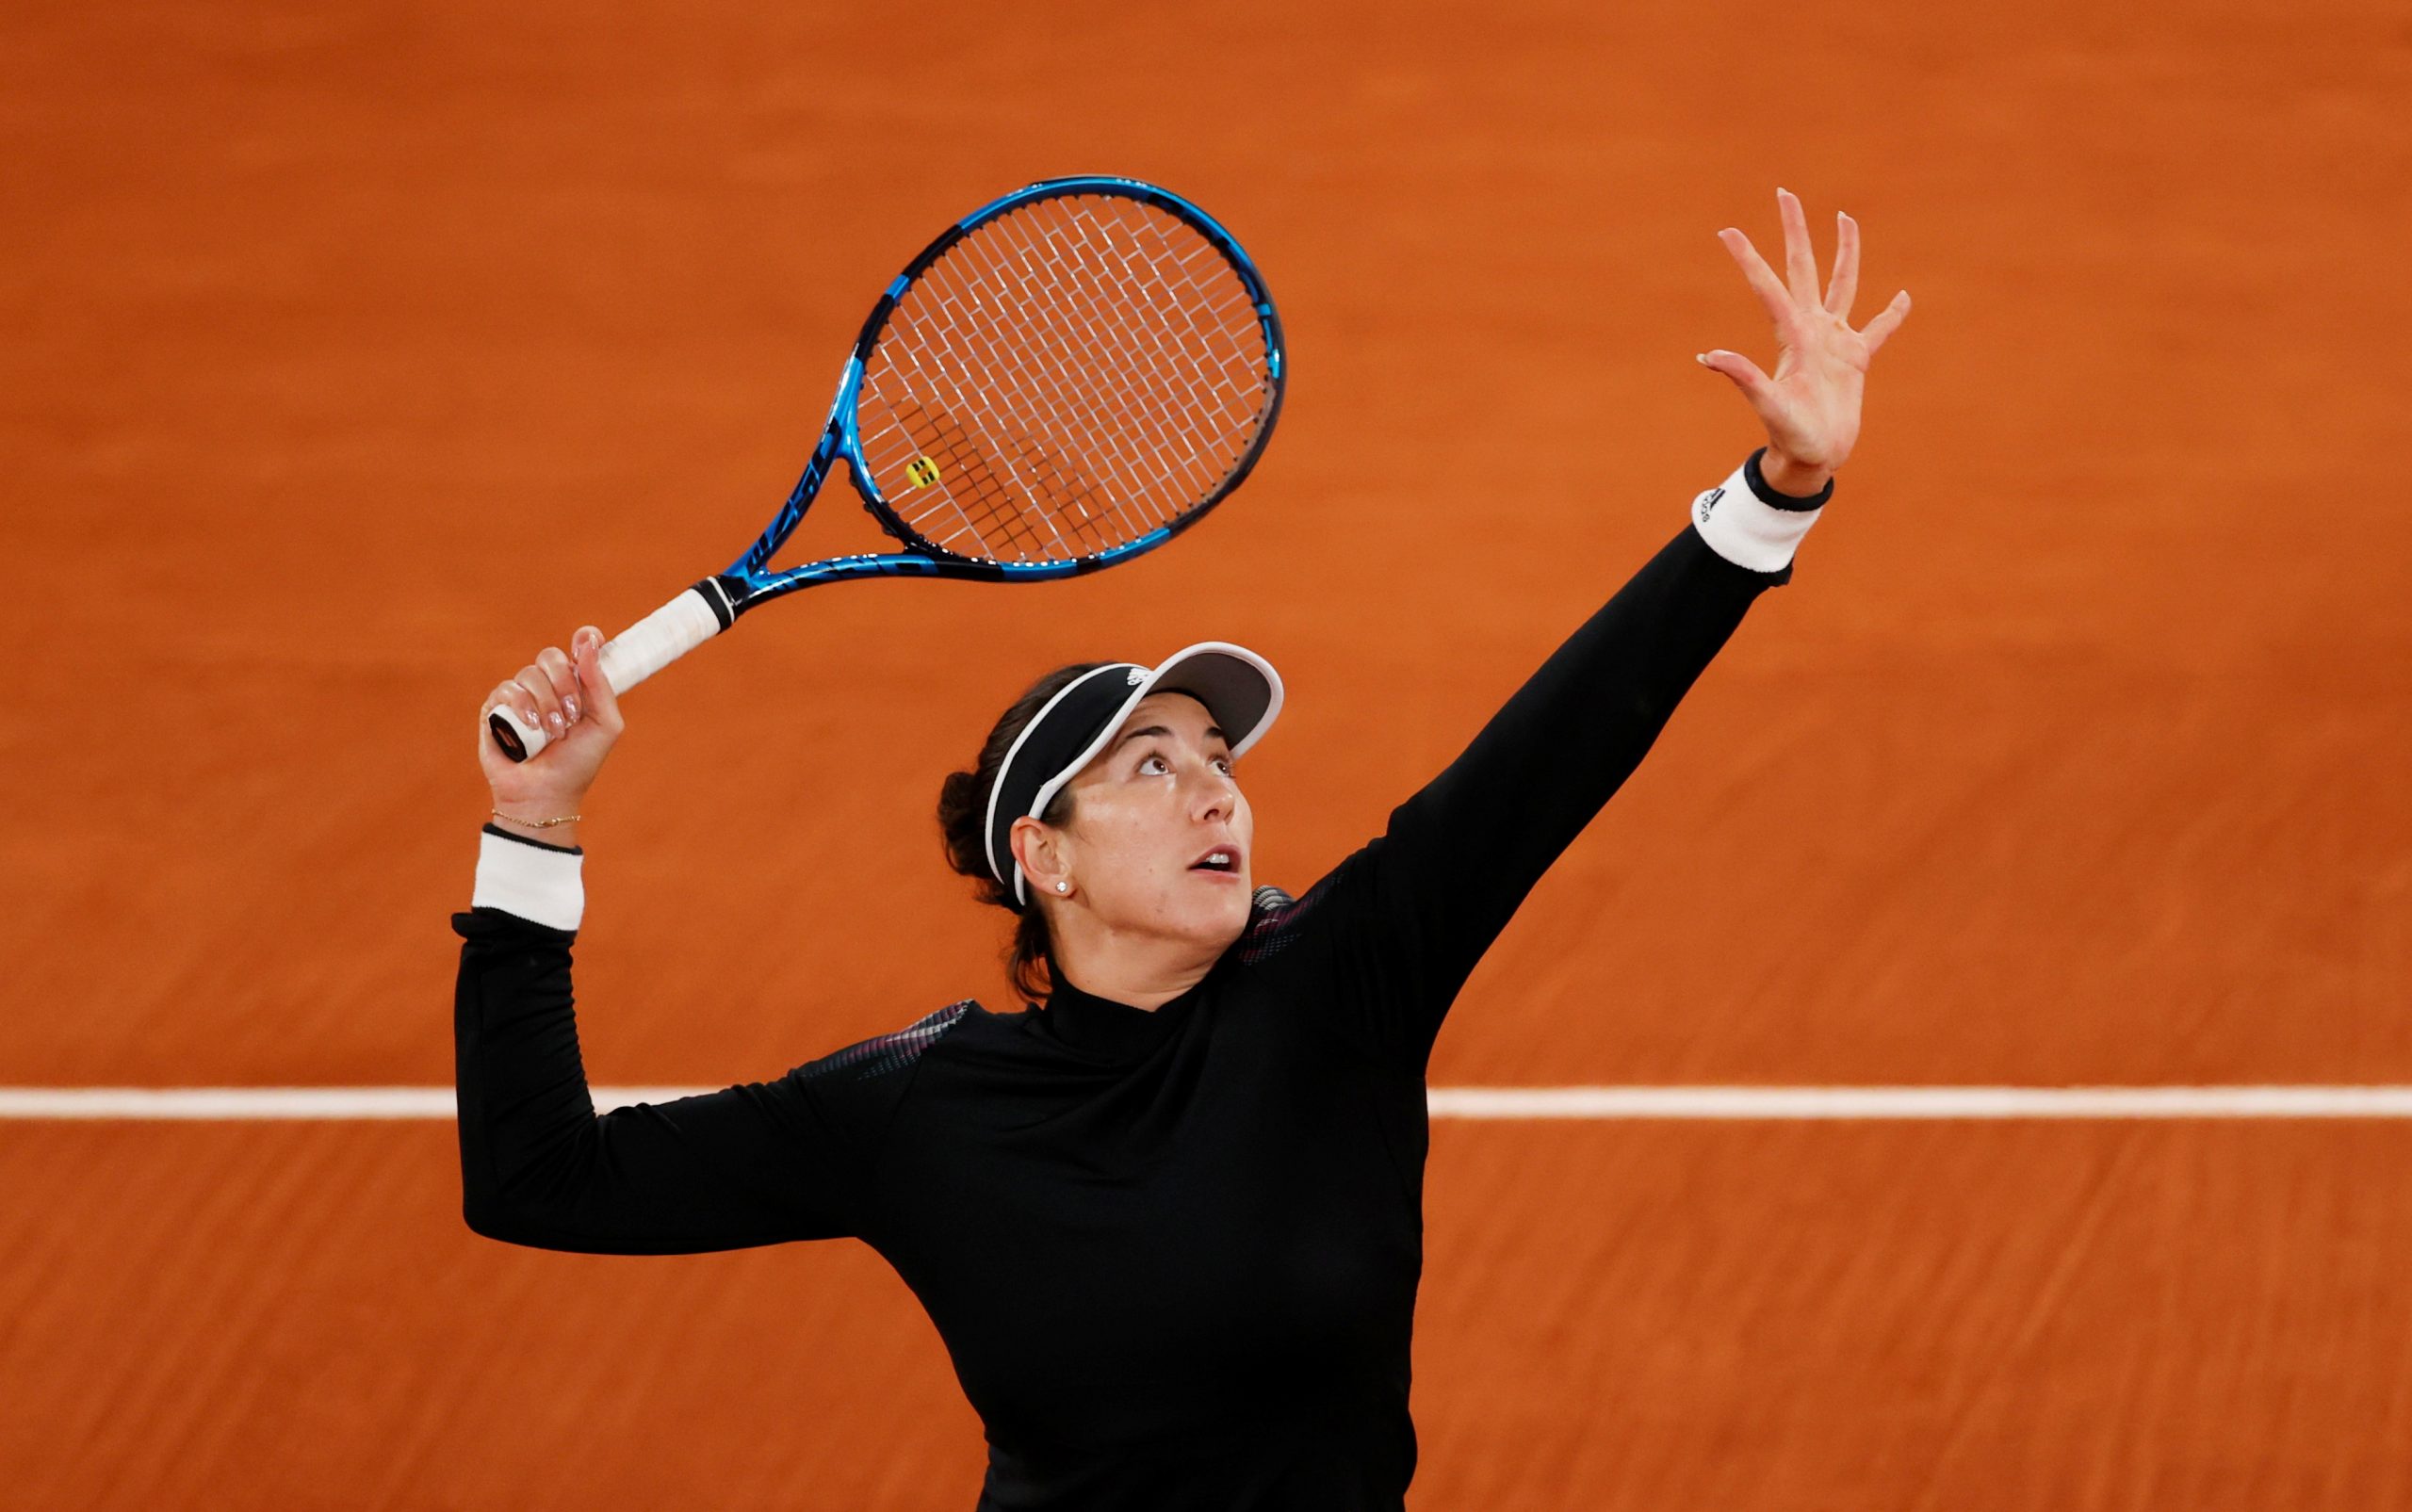 FILE PHOTO: French Open FILE PHOTO: Tennis - French Open - Roland Garros, Paris, France - October 3, 2020  Spain's Garbine Muguruza in action during her third round match against Danielle Rose Collins of the U.S REUTERS/Christian Hartmann/File Photo CHRISTIAN HARTMANN